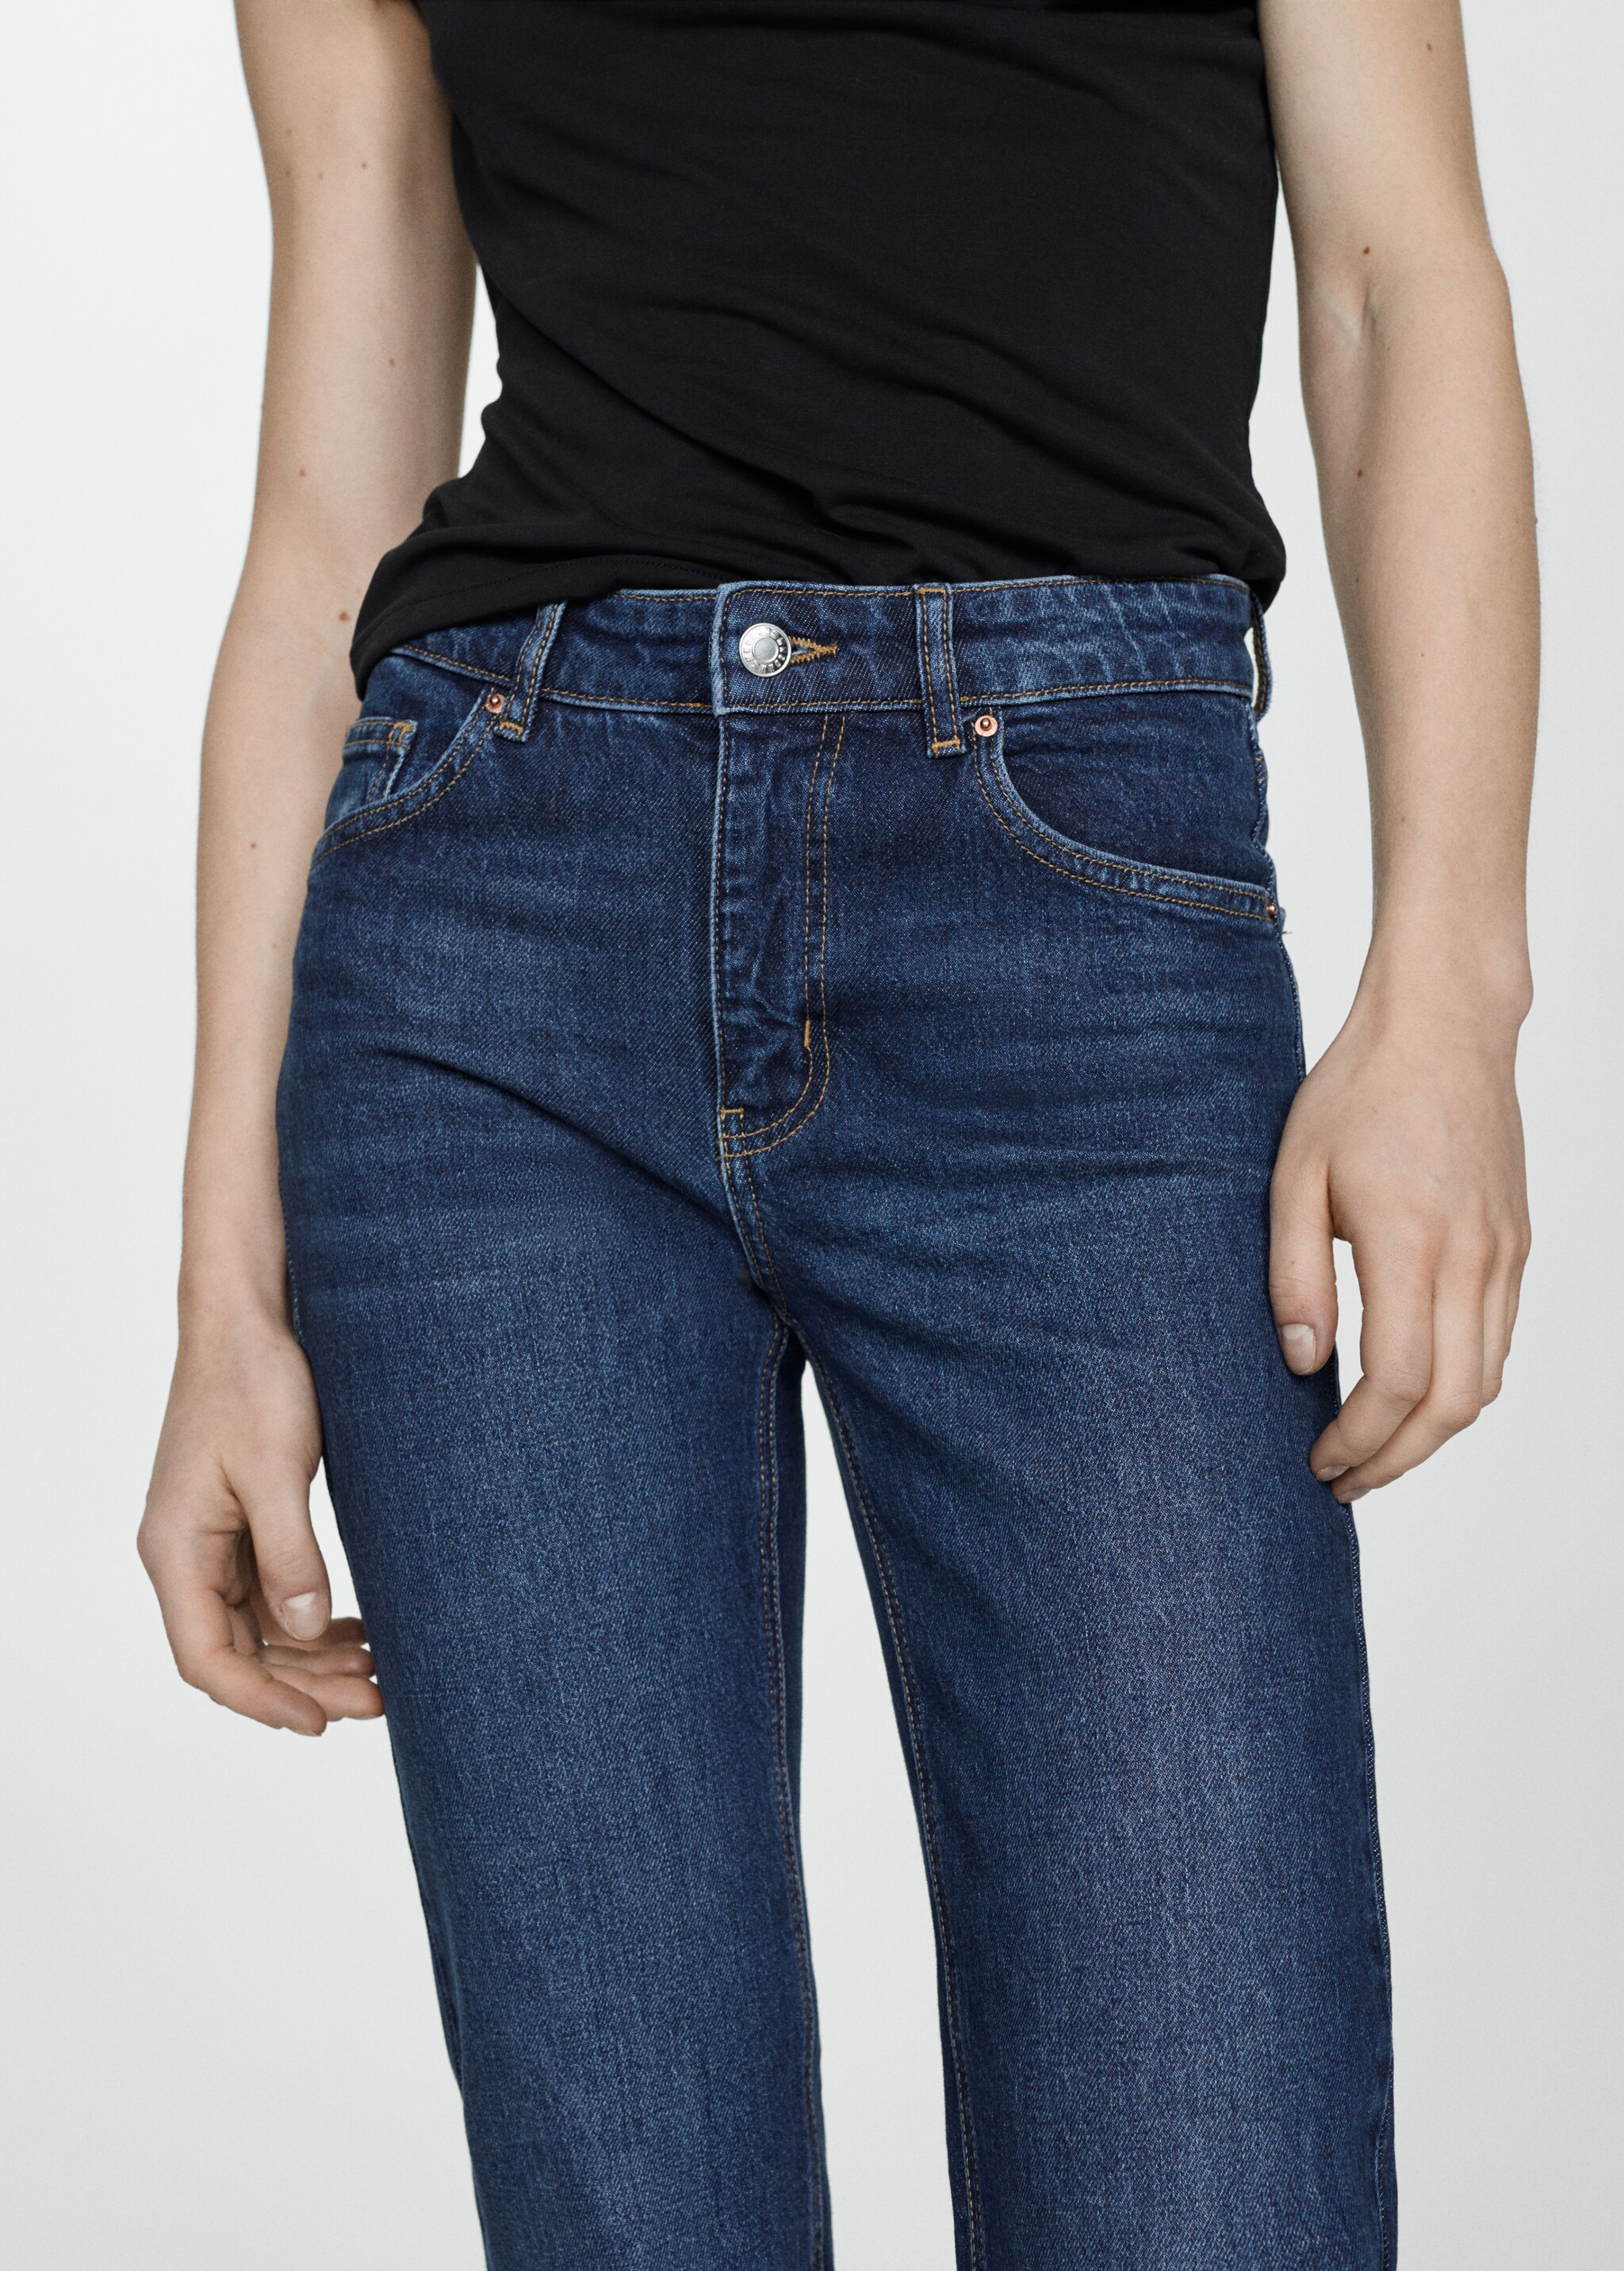 Medium-rise straight jeans with slits - Details of the article 4